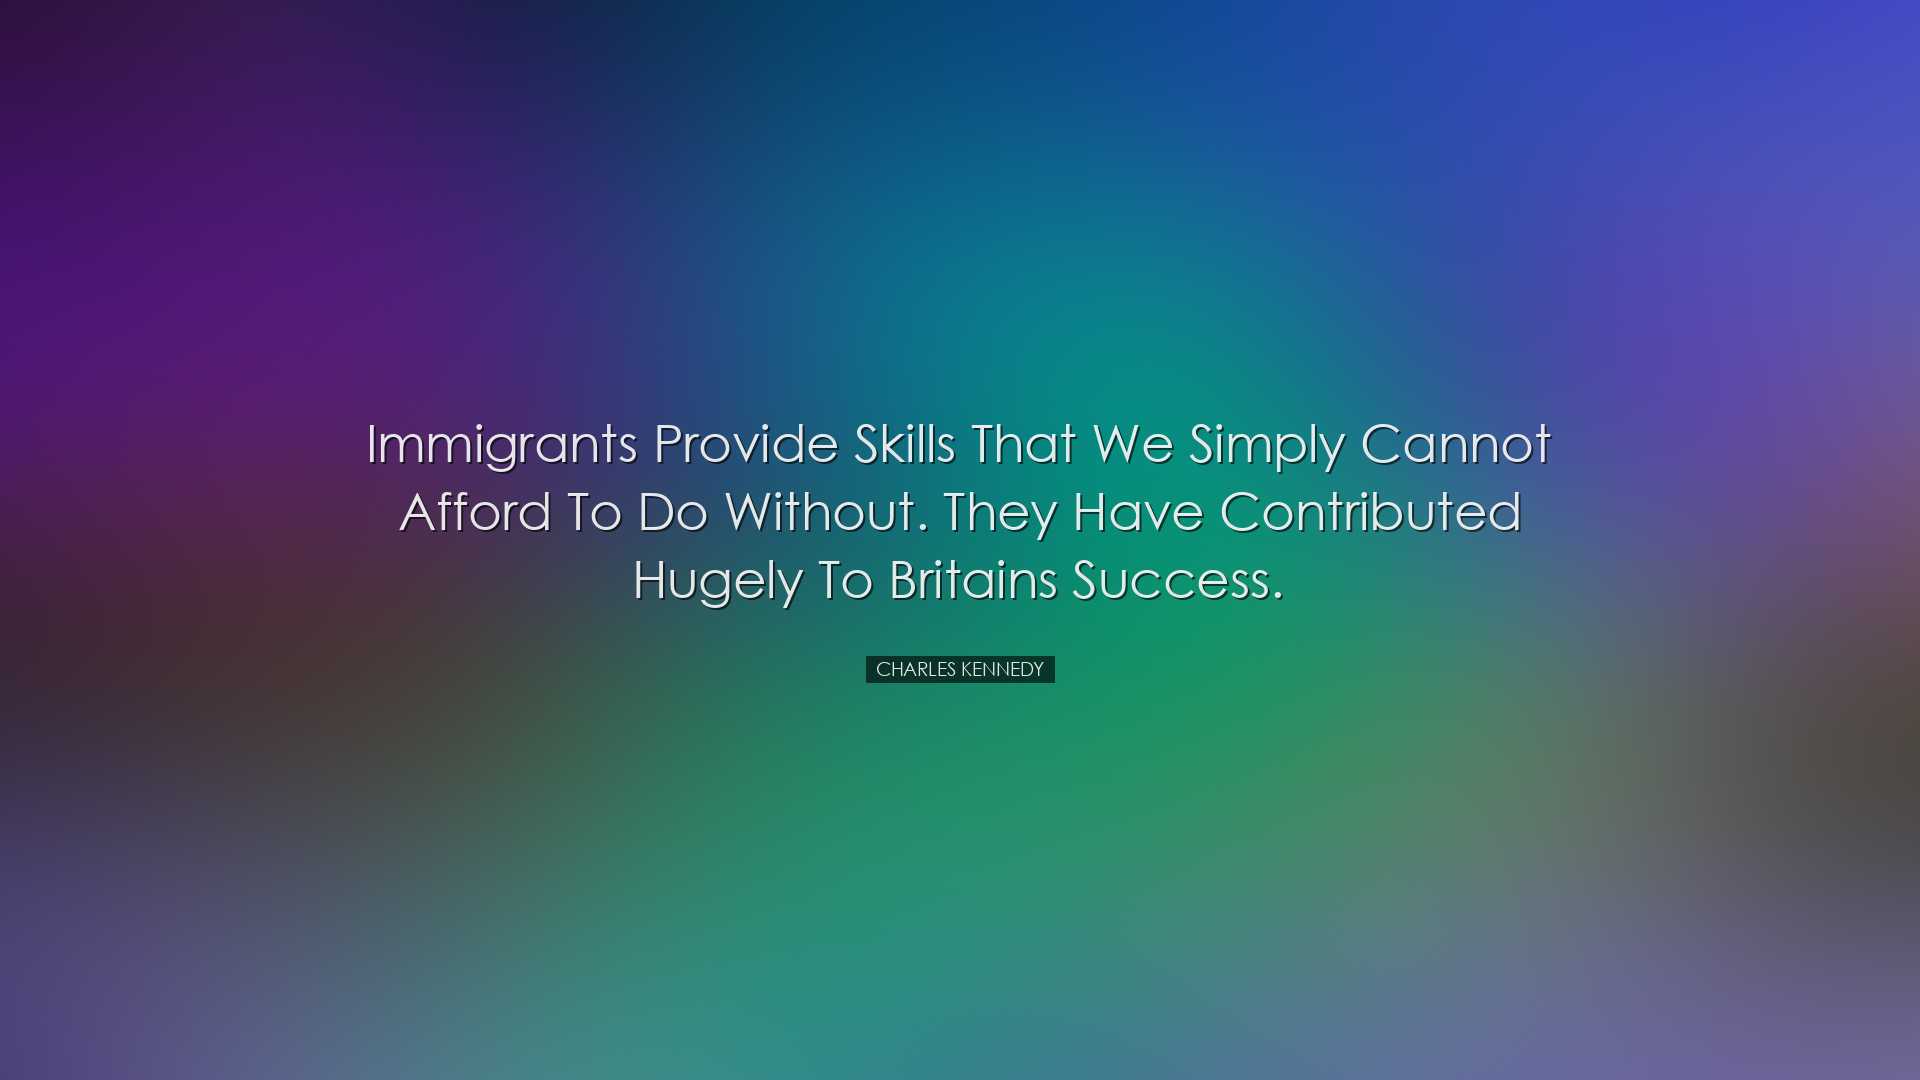 Immigrants provide skills that we simply cannot afford to do witho